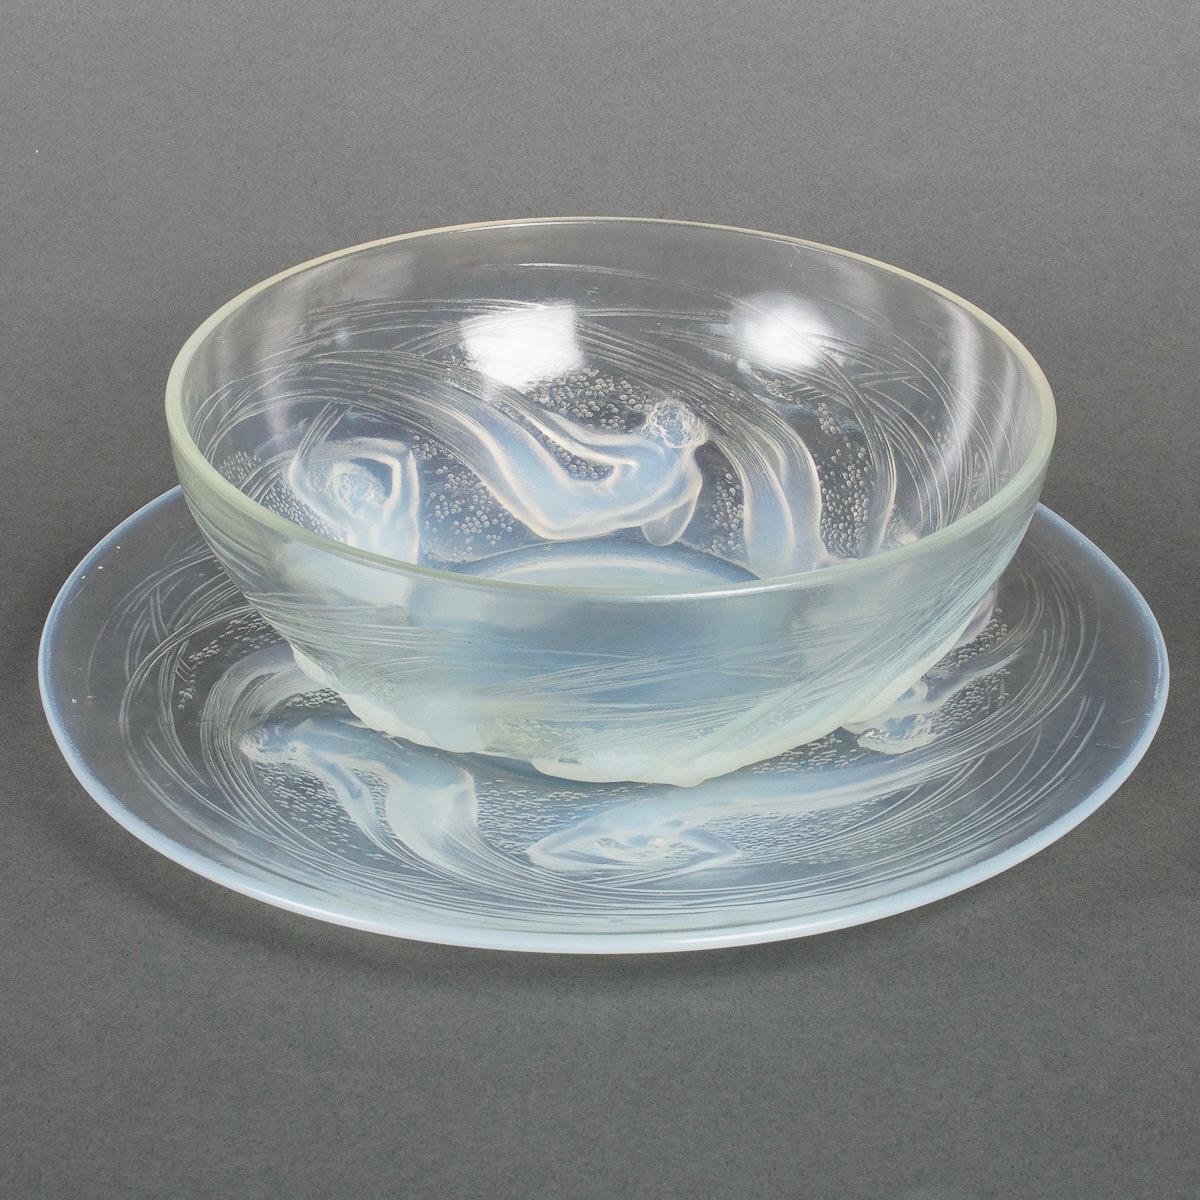 Plate and Bowl 